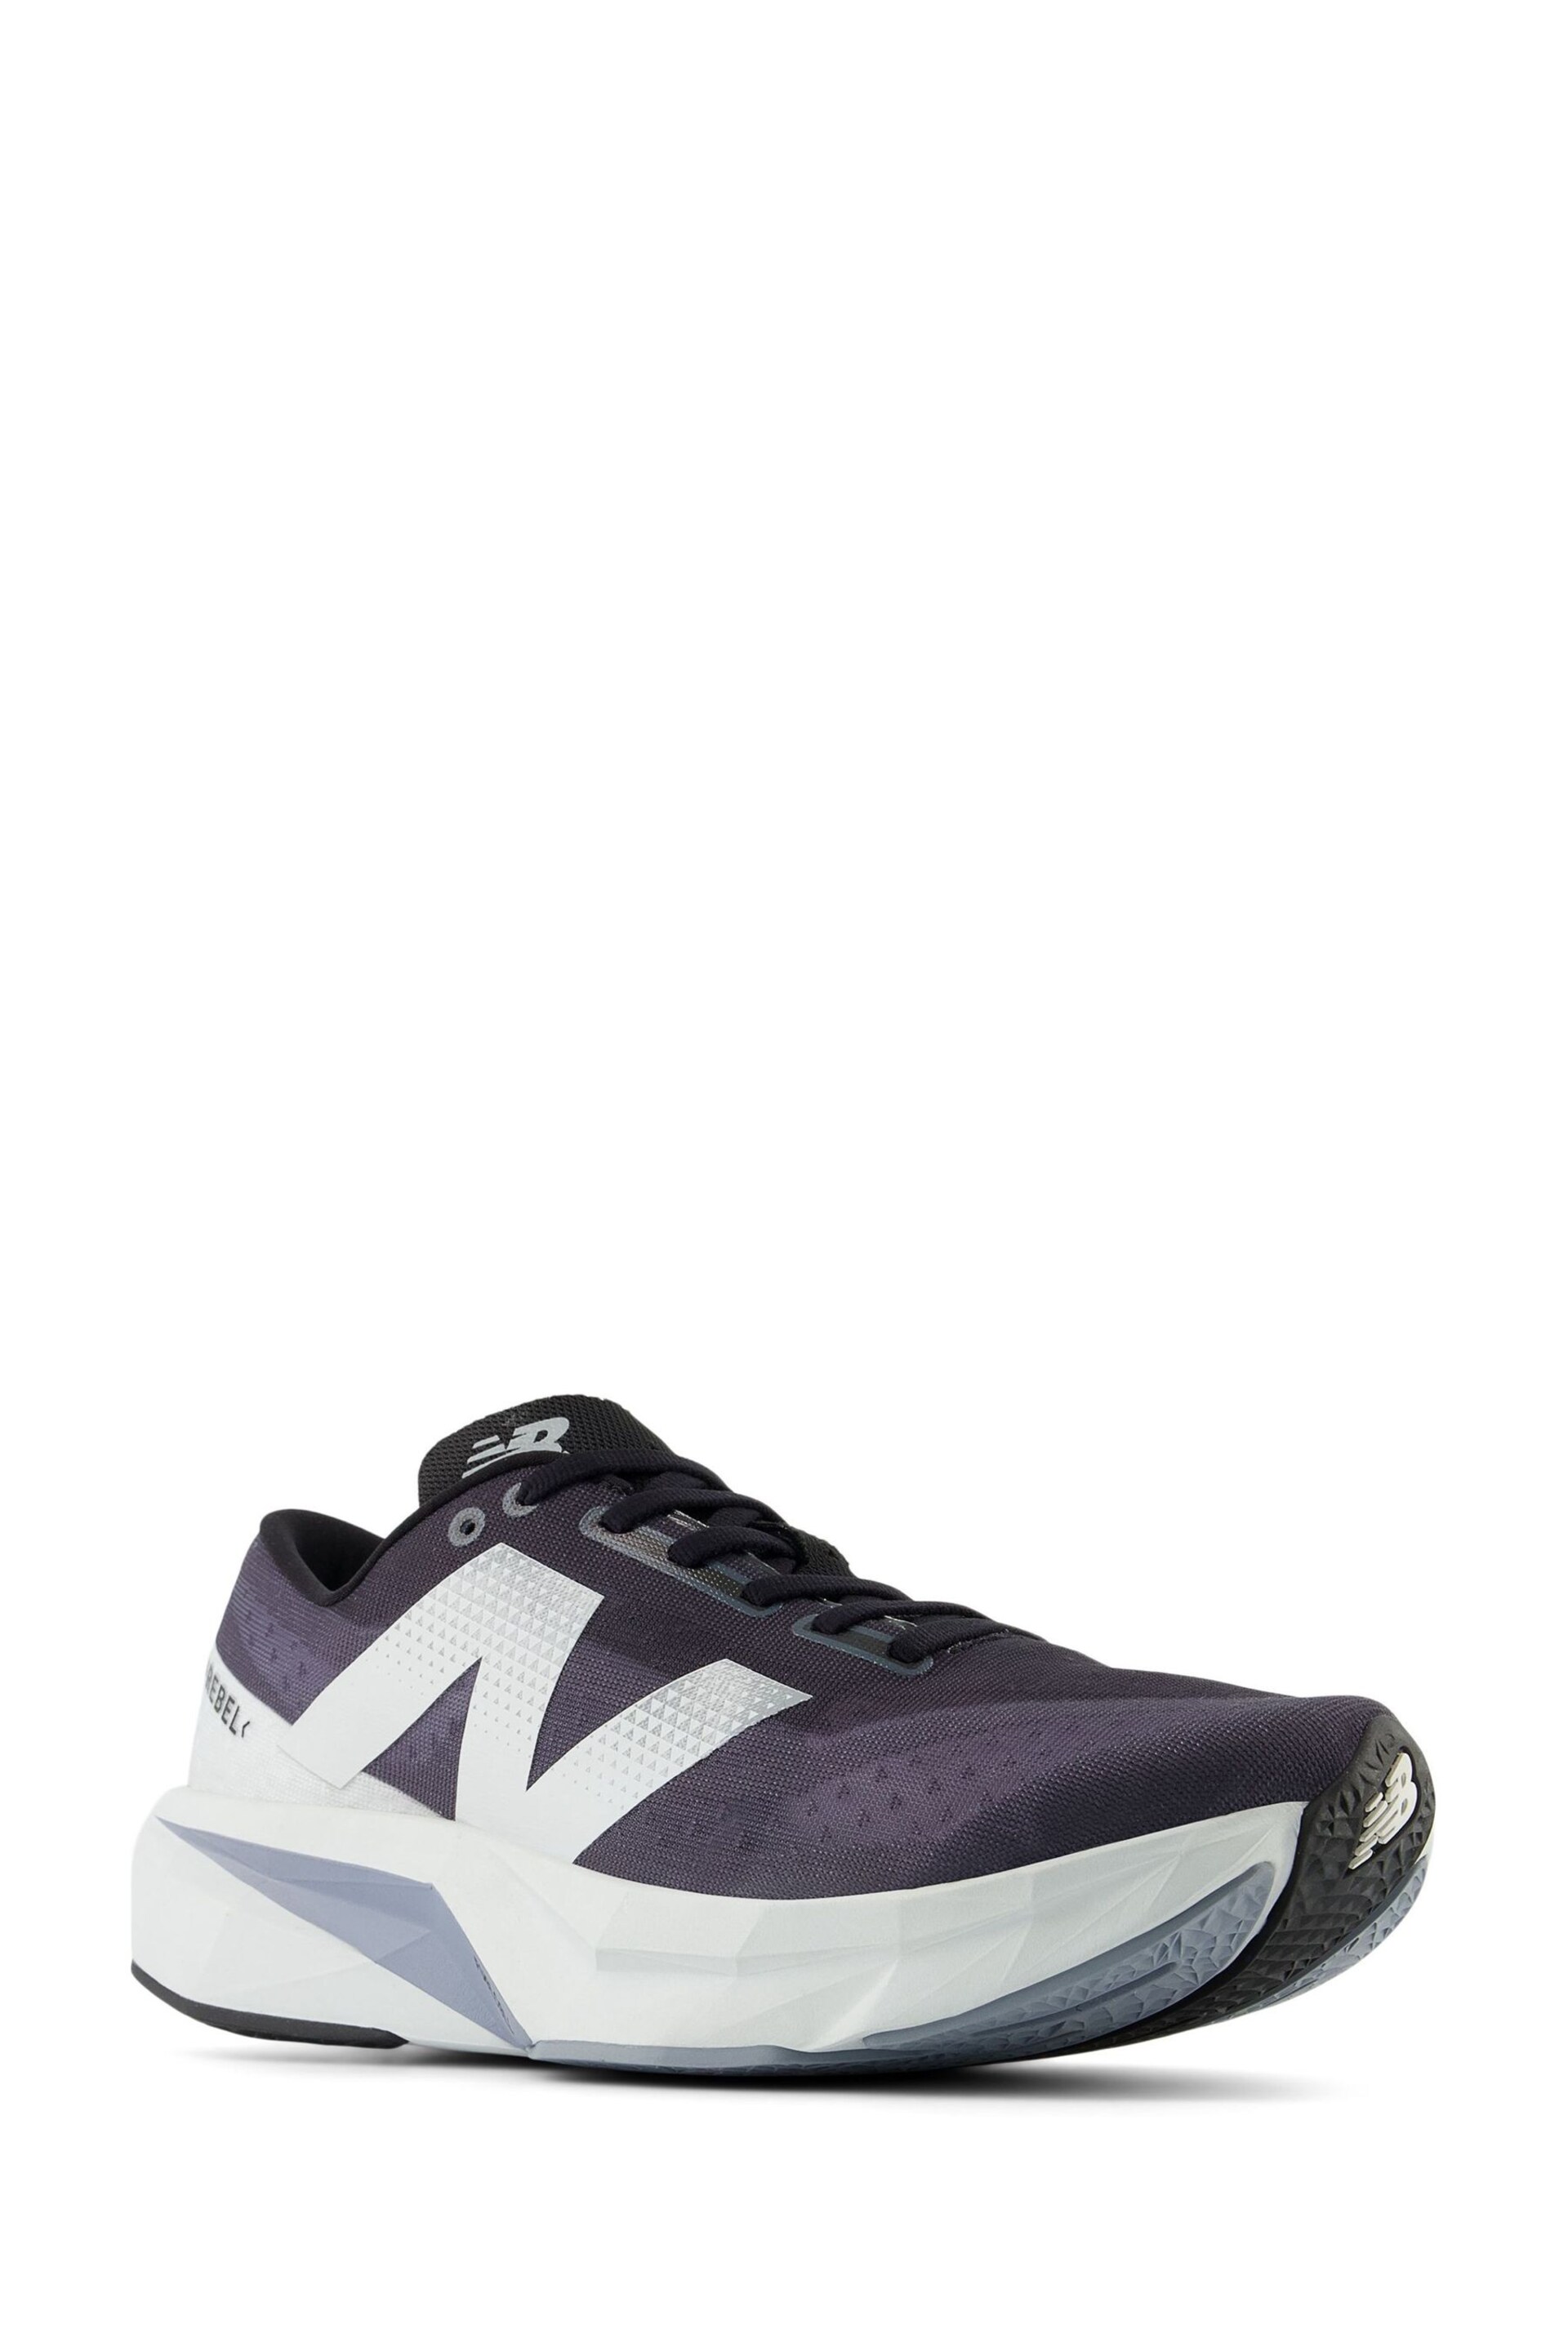 New Balance Grey Mens Fuelcell Rebel Trainers - Image 5 of 12